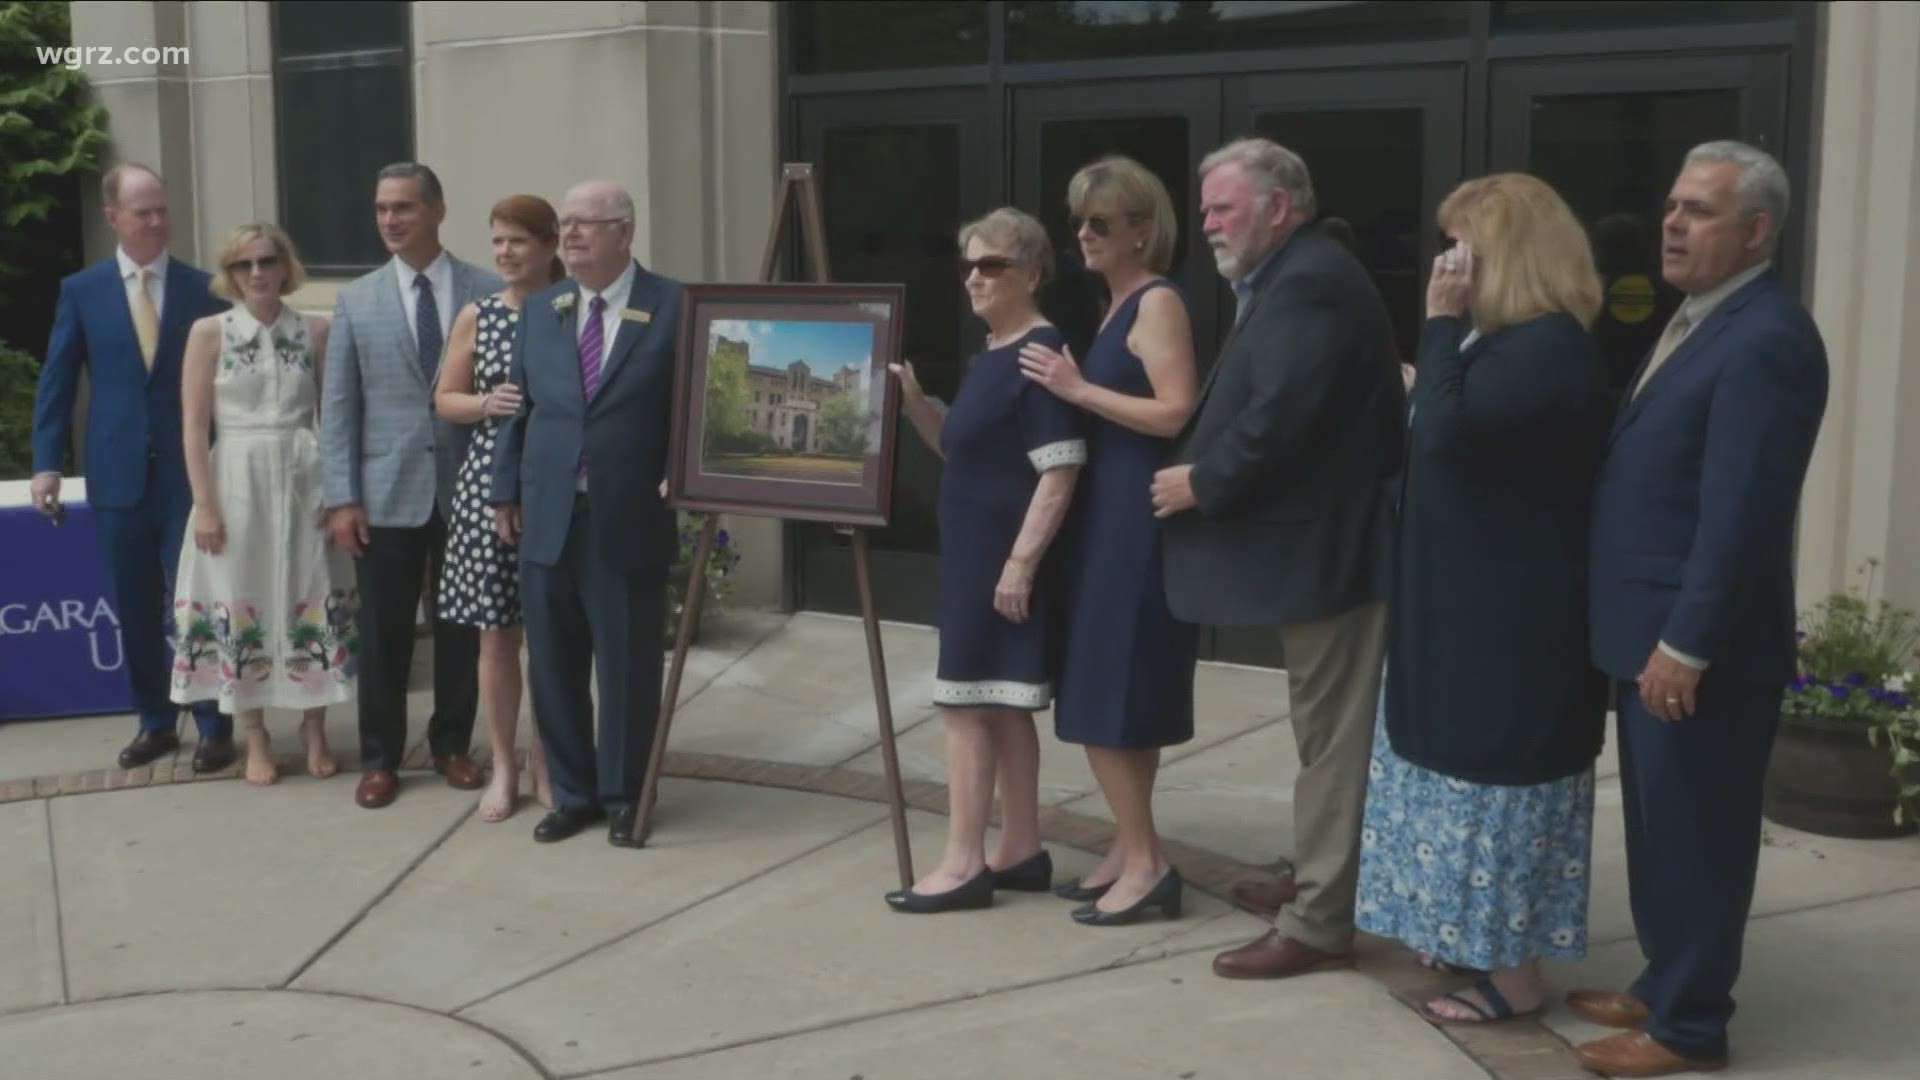 Niagara University honored one of their alumni yesterday by dedicating a hall to him on campus.